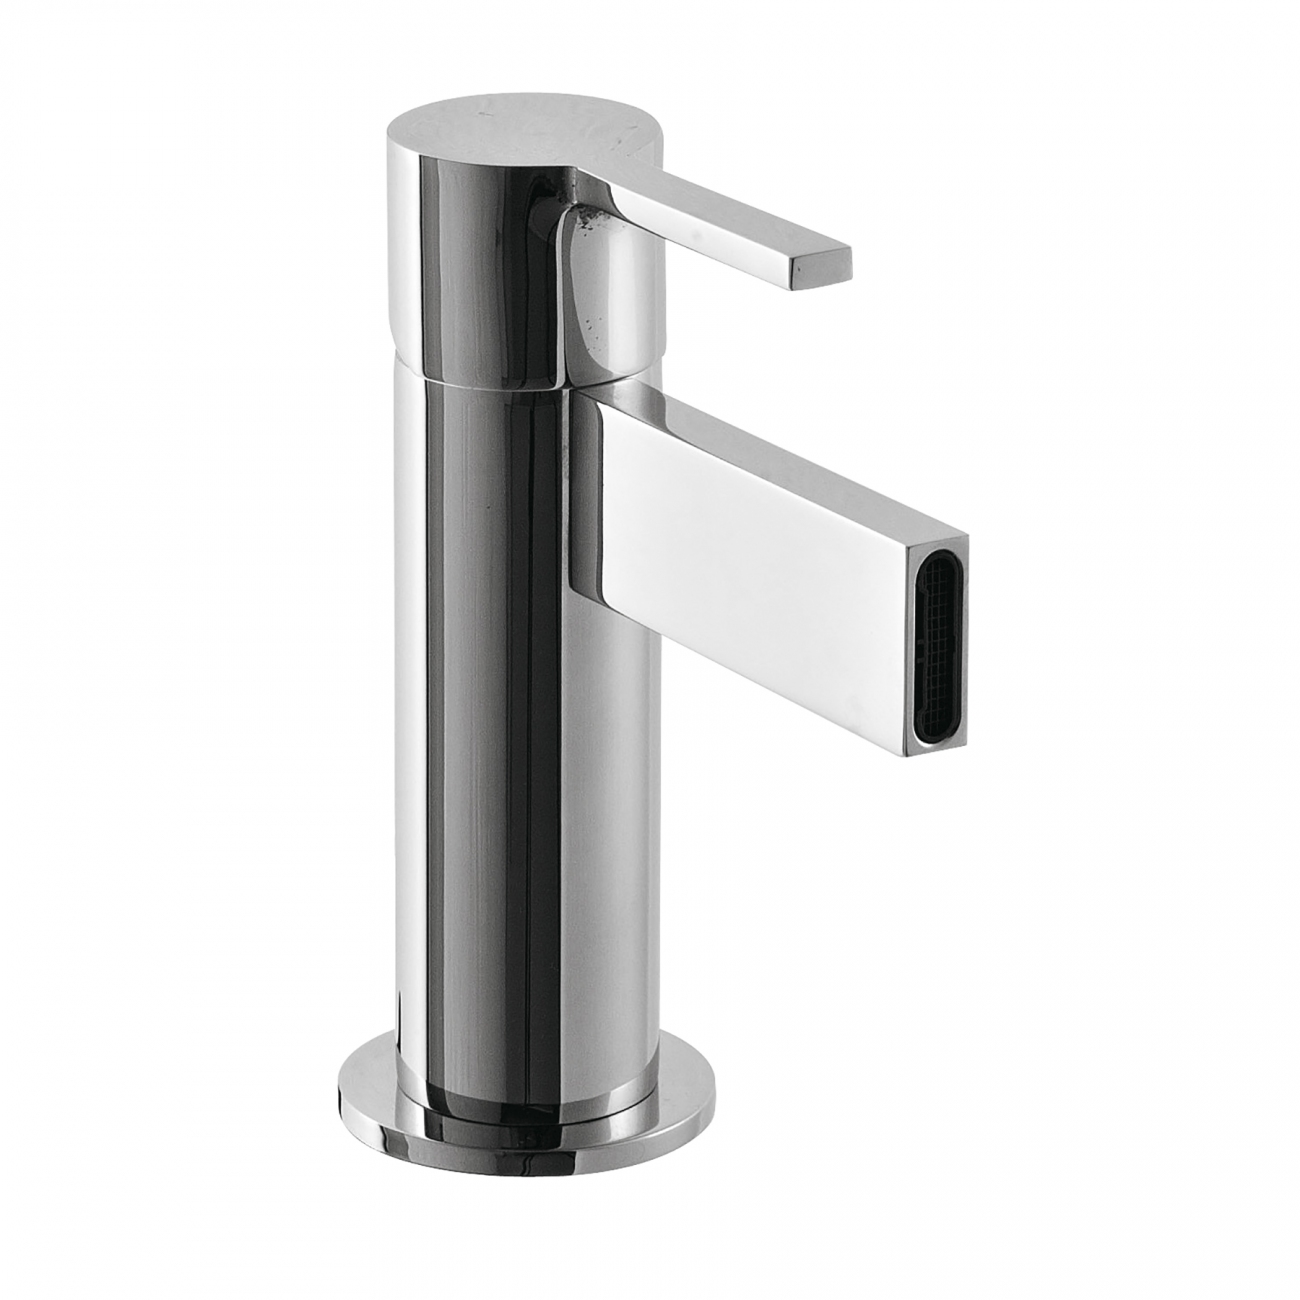 Treemme Time Out bidet mixer